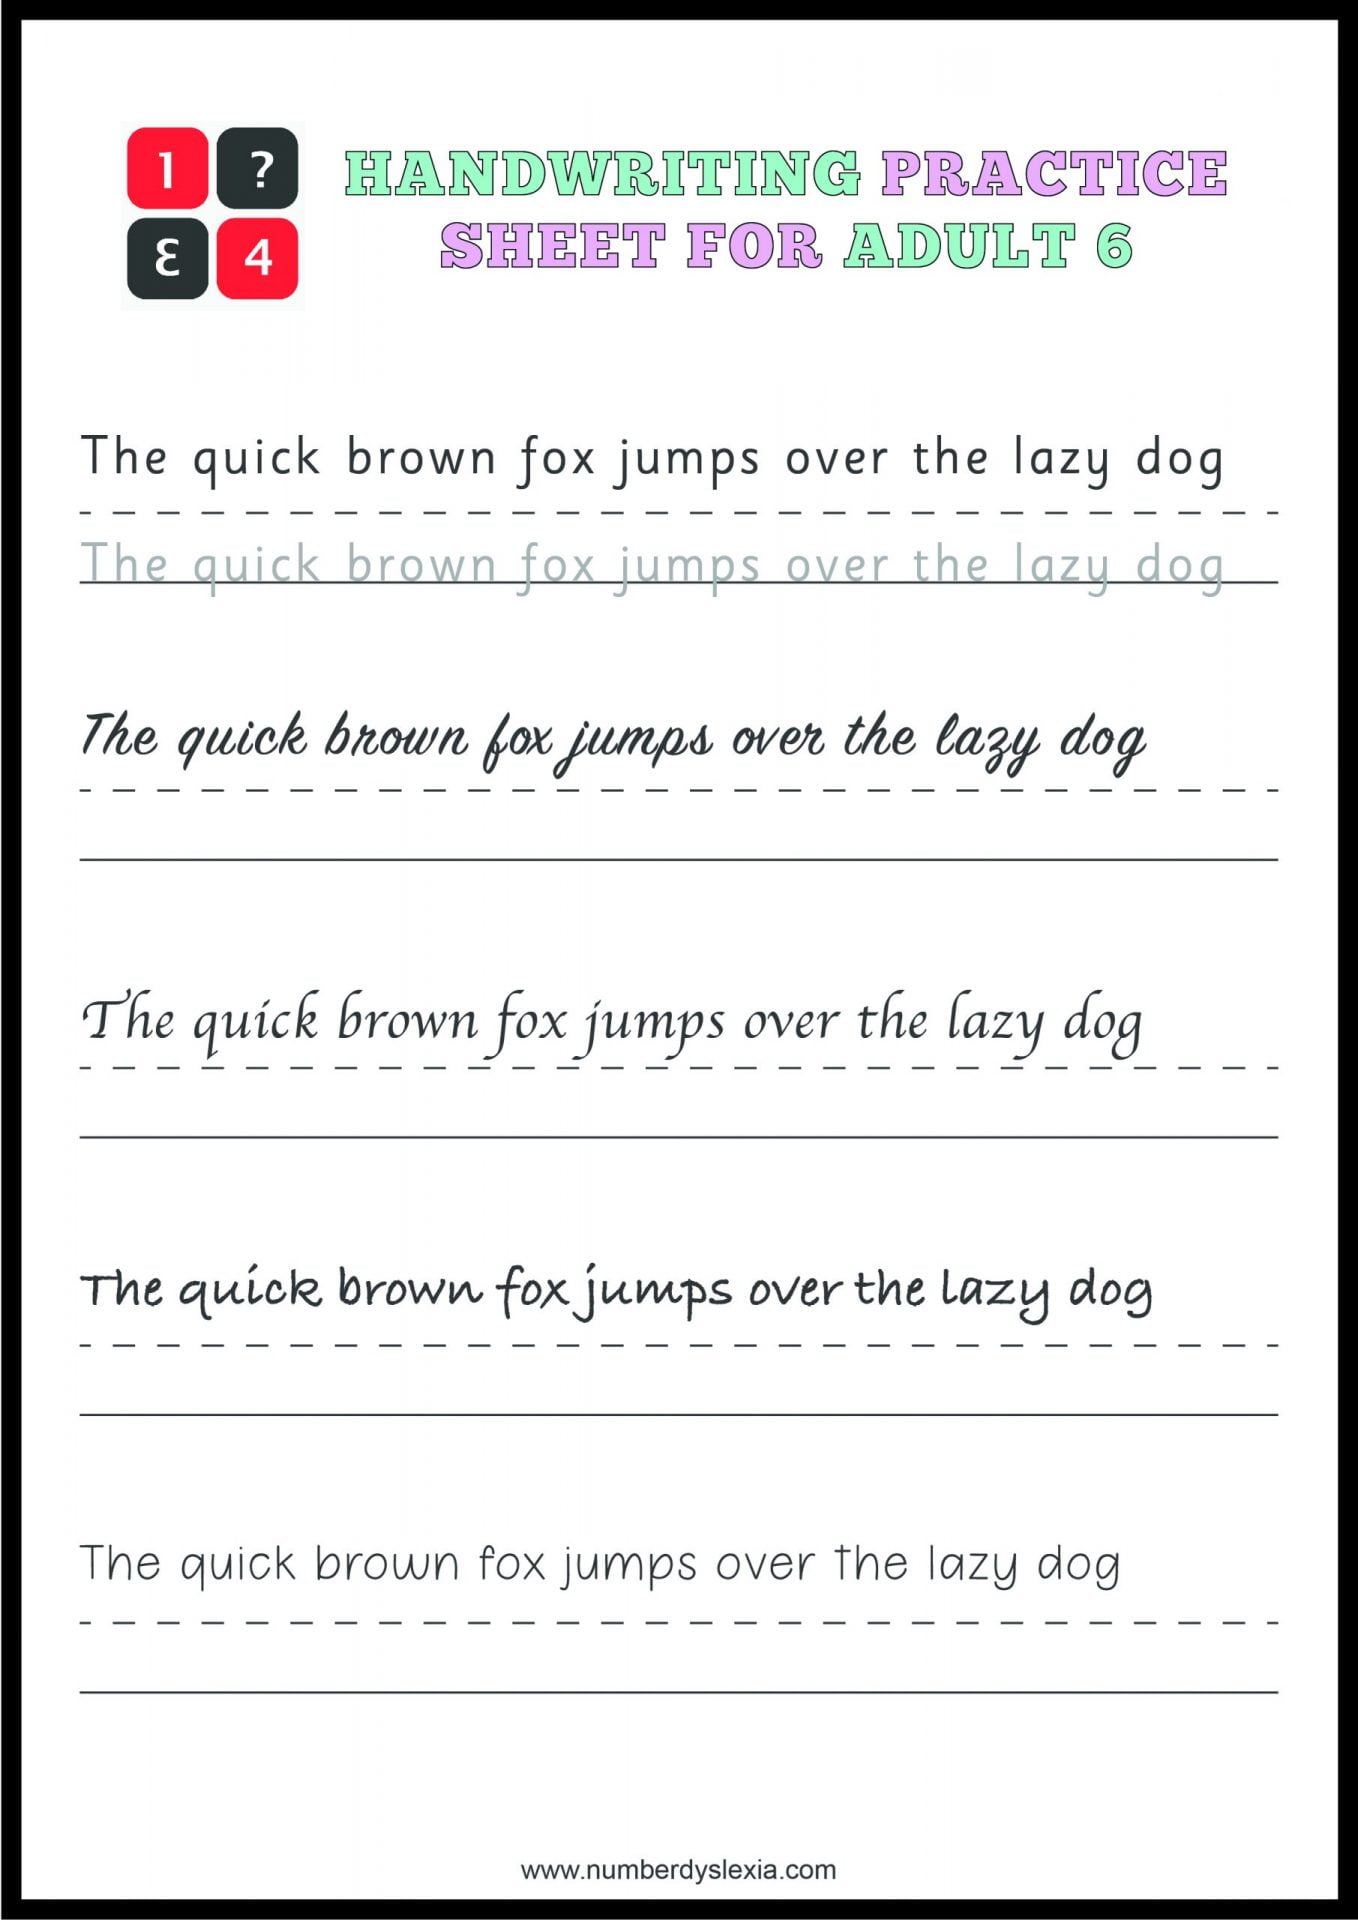 handwriting-practice-worksheets-pdf-for-adults-free-printable